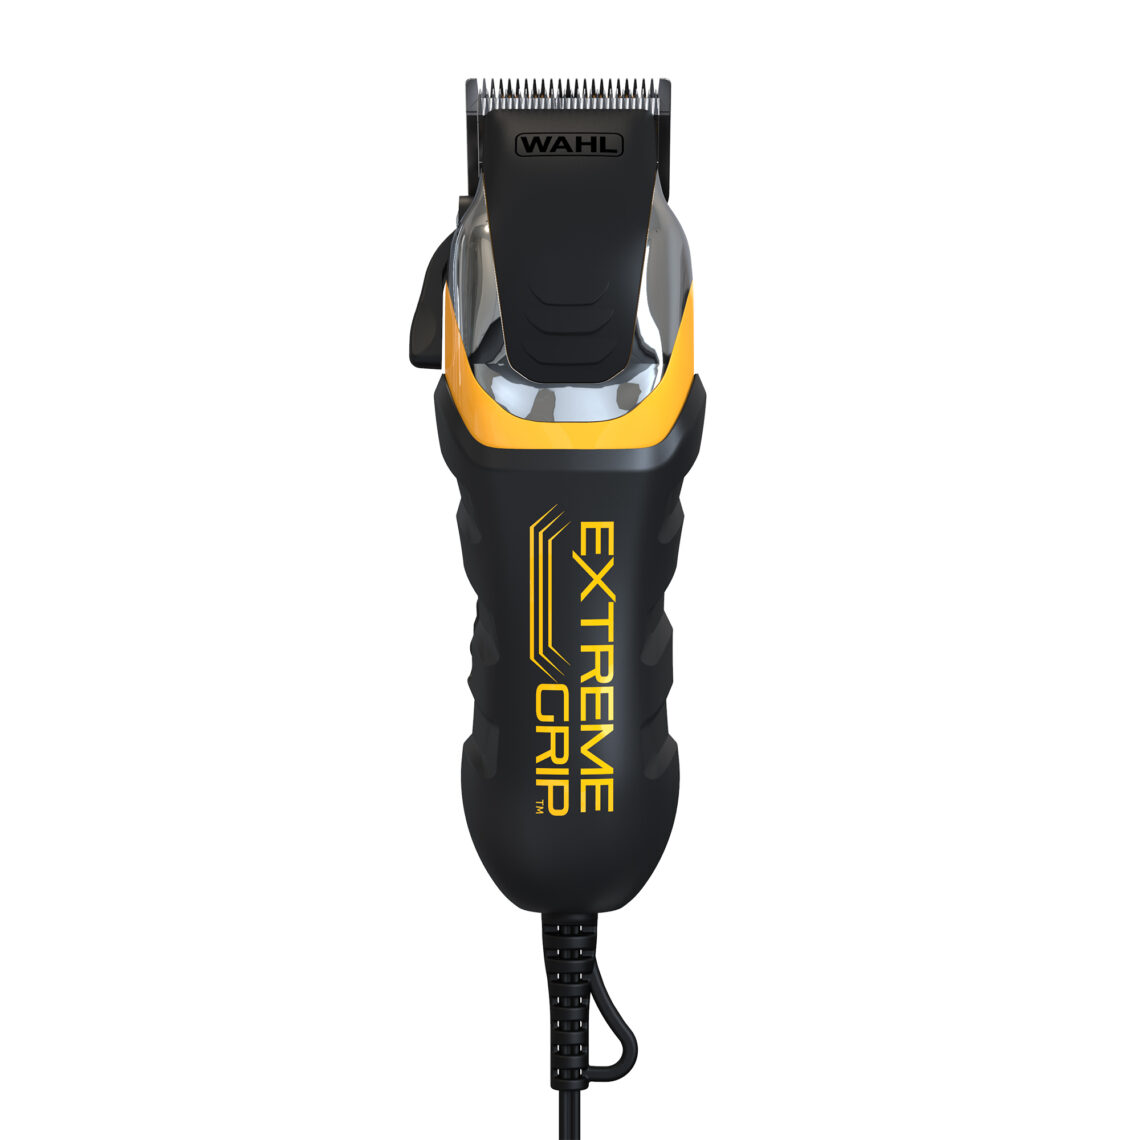 wahl extreme grip hair clippers